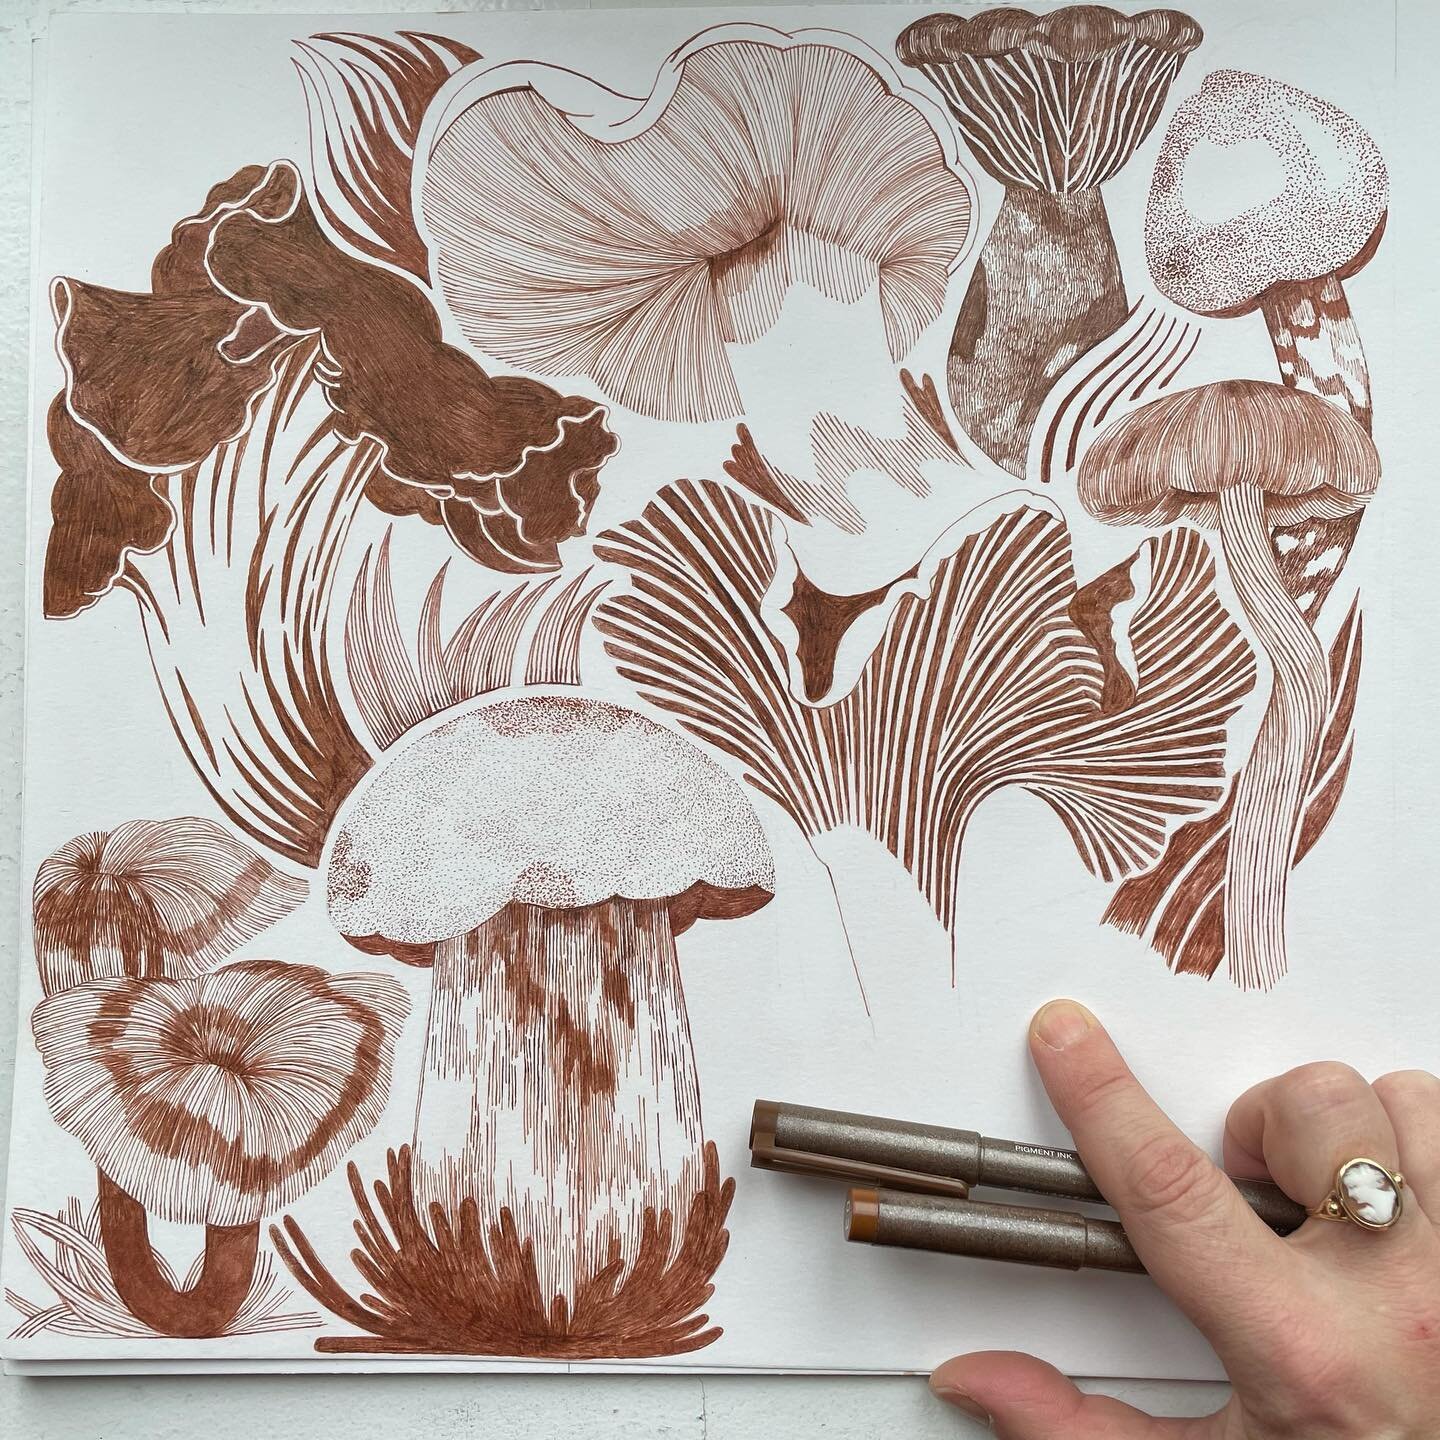 Autumn is todays prompt (day 15-16) 
#patternprintober2021 #patternprintober #mushrooms #autumn #brown #sepia #copics #drawing #monochrome #forest #pickingmushrooms